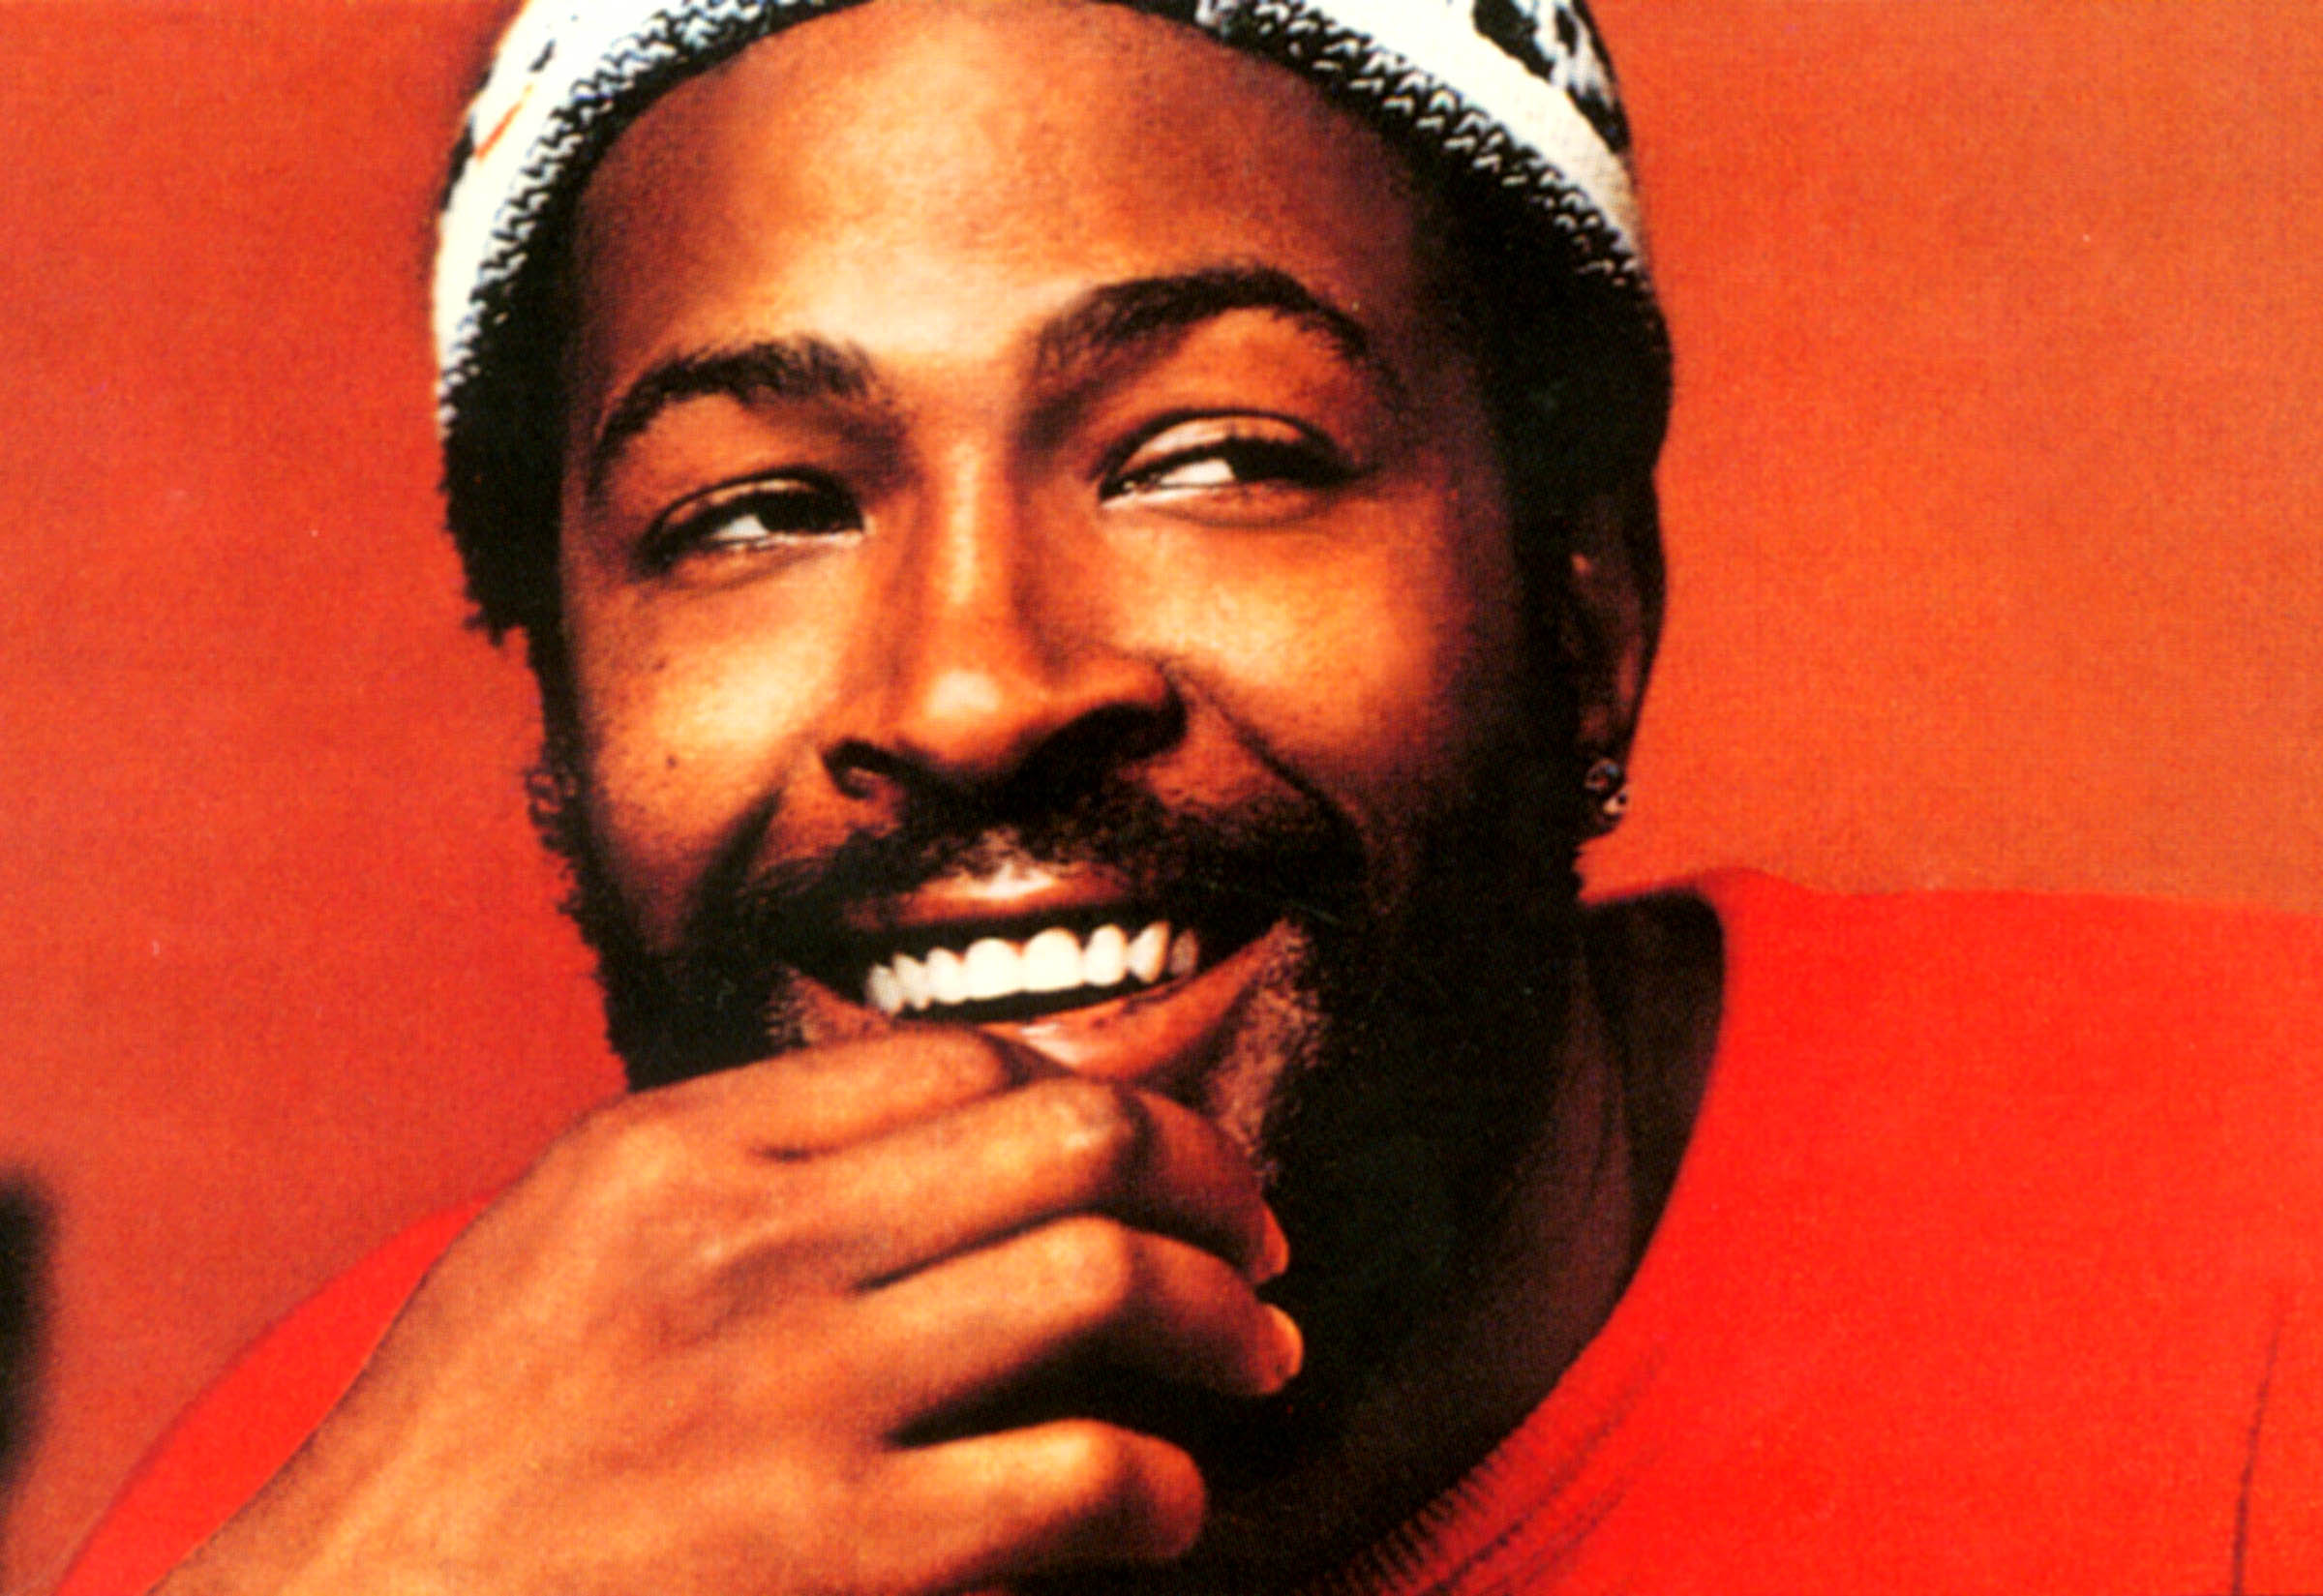 Anuncian documental sobre ‘What’s Going On’ de Marvin Gaye